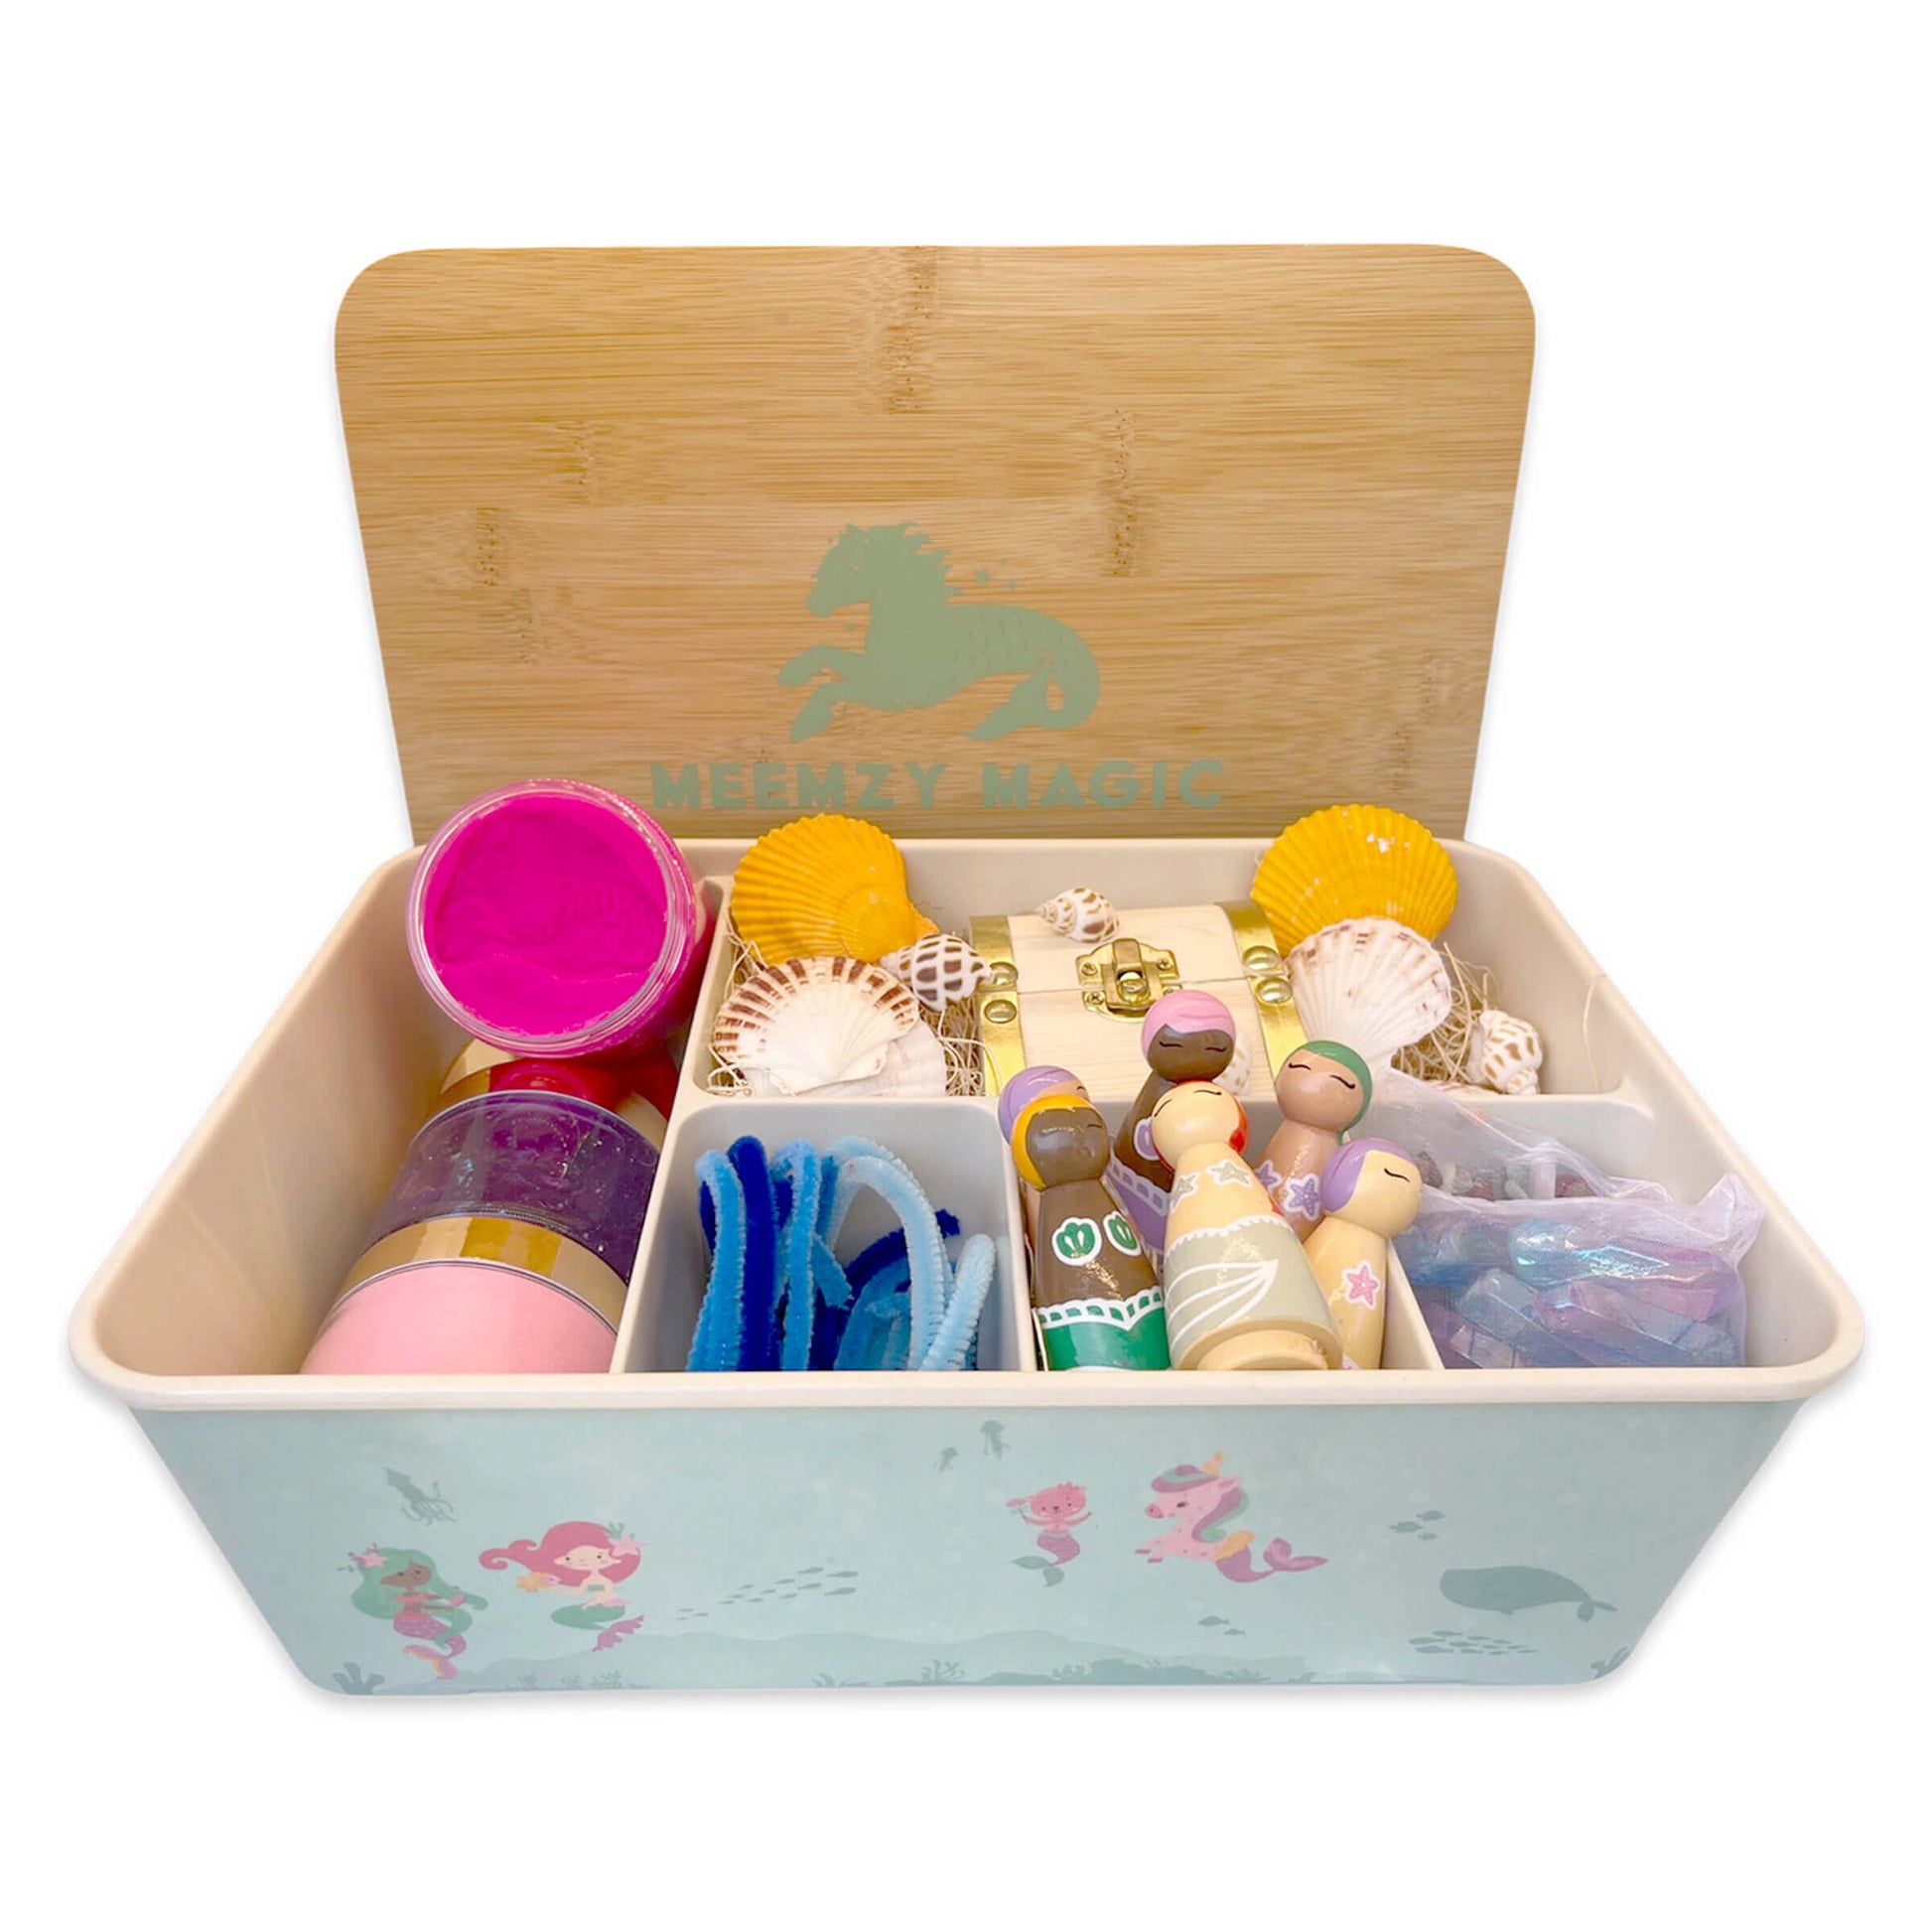 Under the Sea kit featuring shells, play dough, pipe cleaners, colorful crystals, and mermaid peg dolls